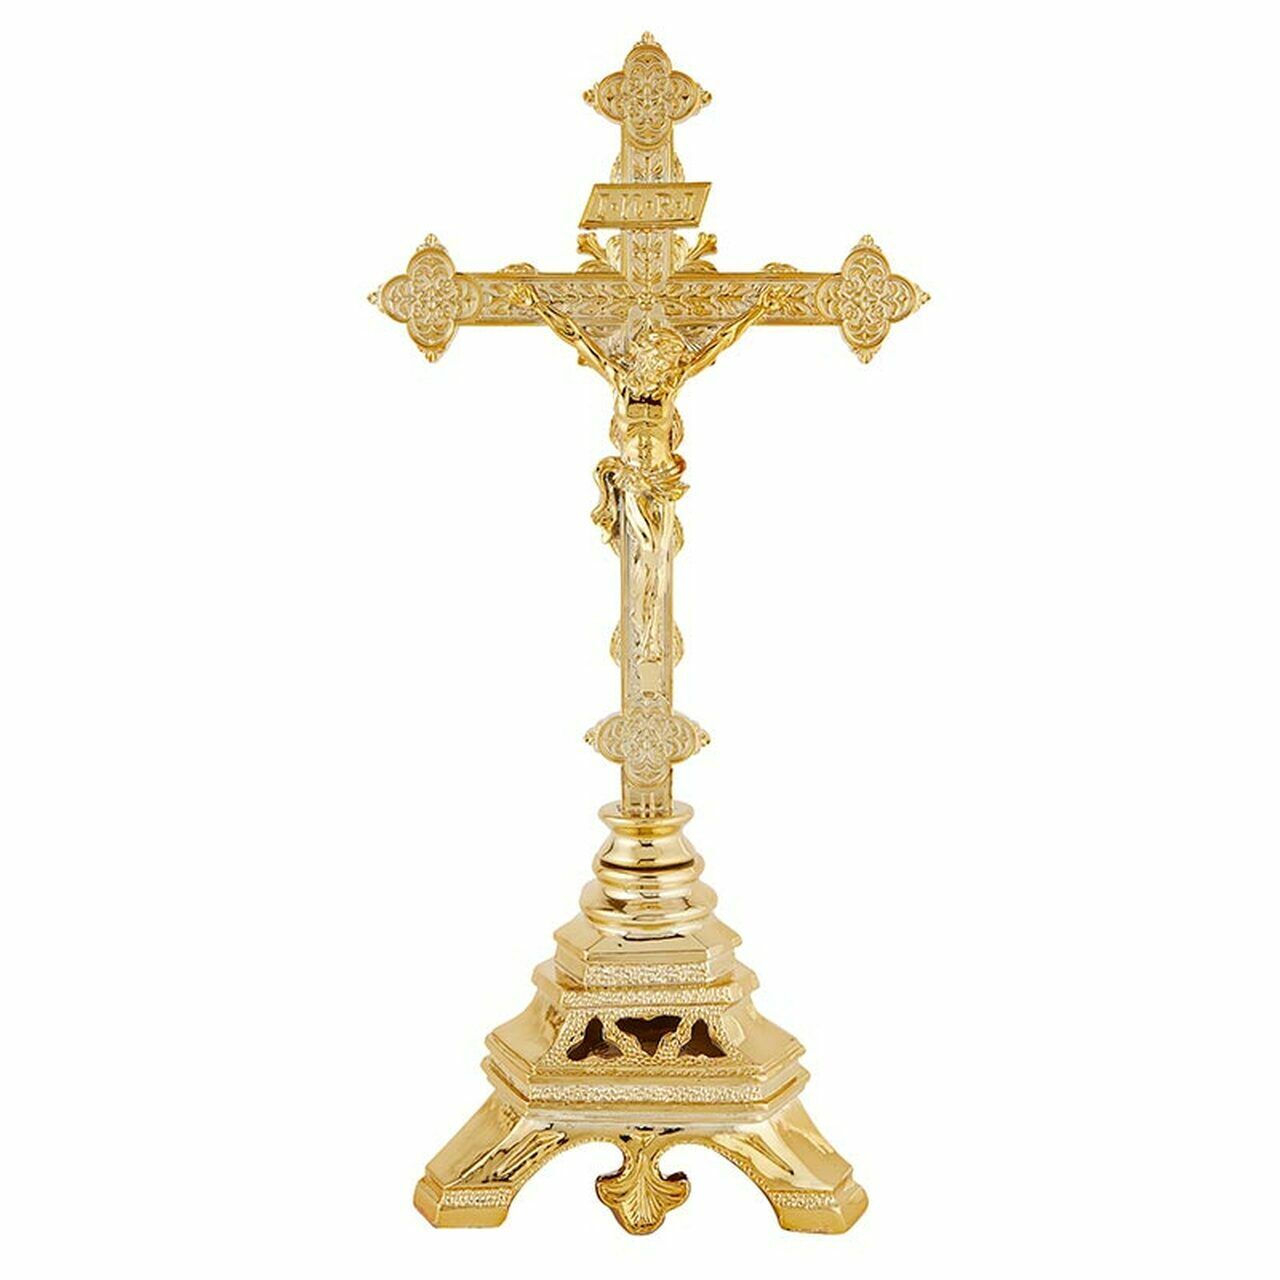 Versailles Resin Gold Toned Resin Ornate Standing Crucifix For Church, 17 In